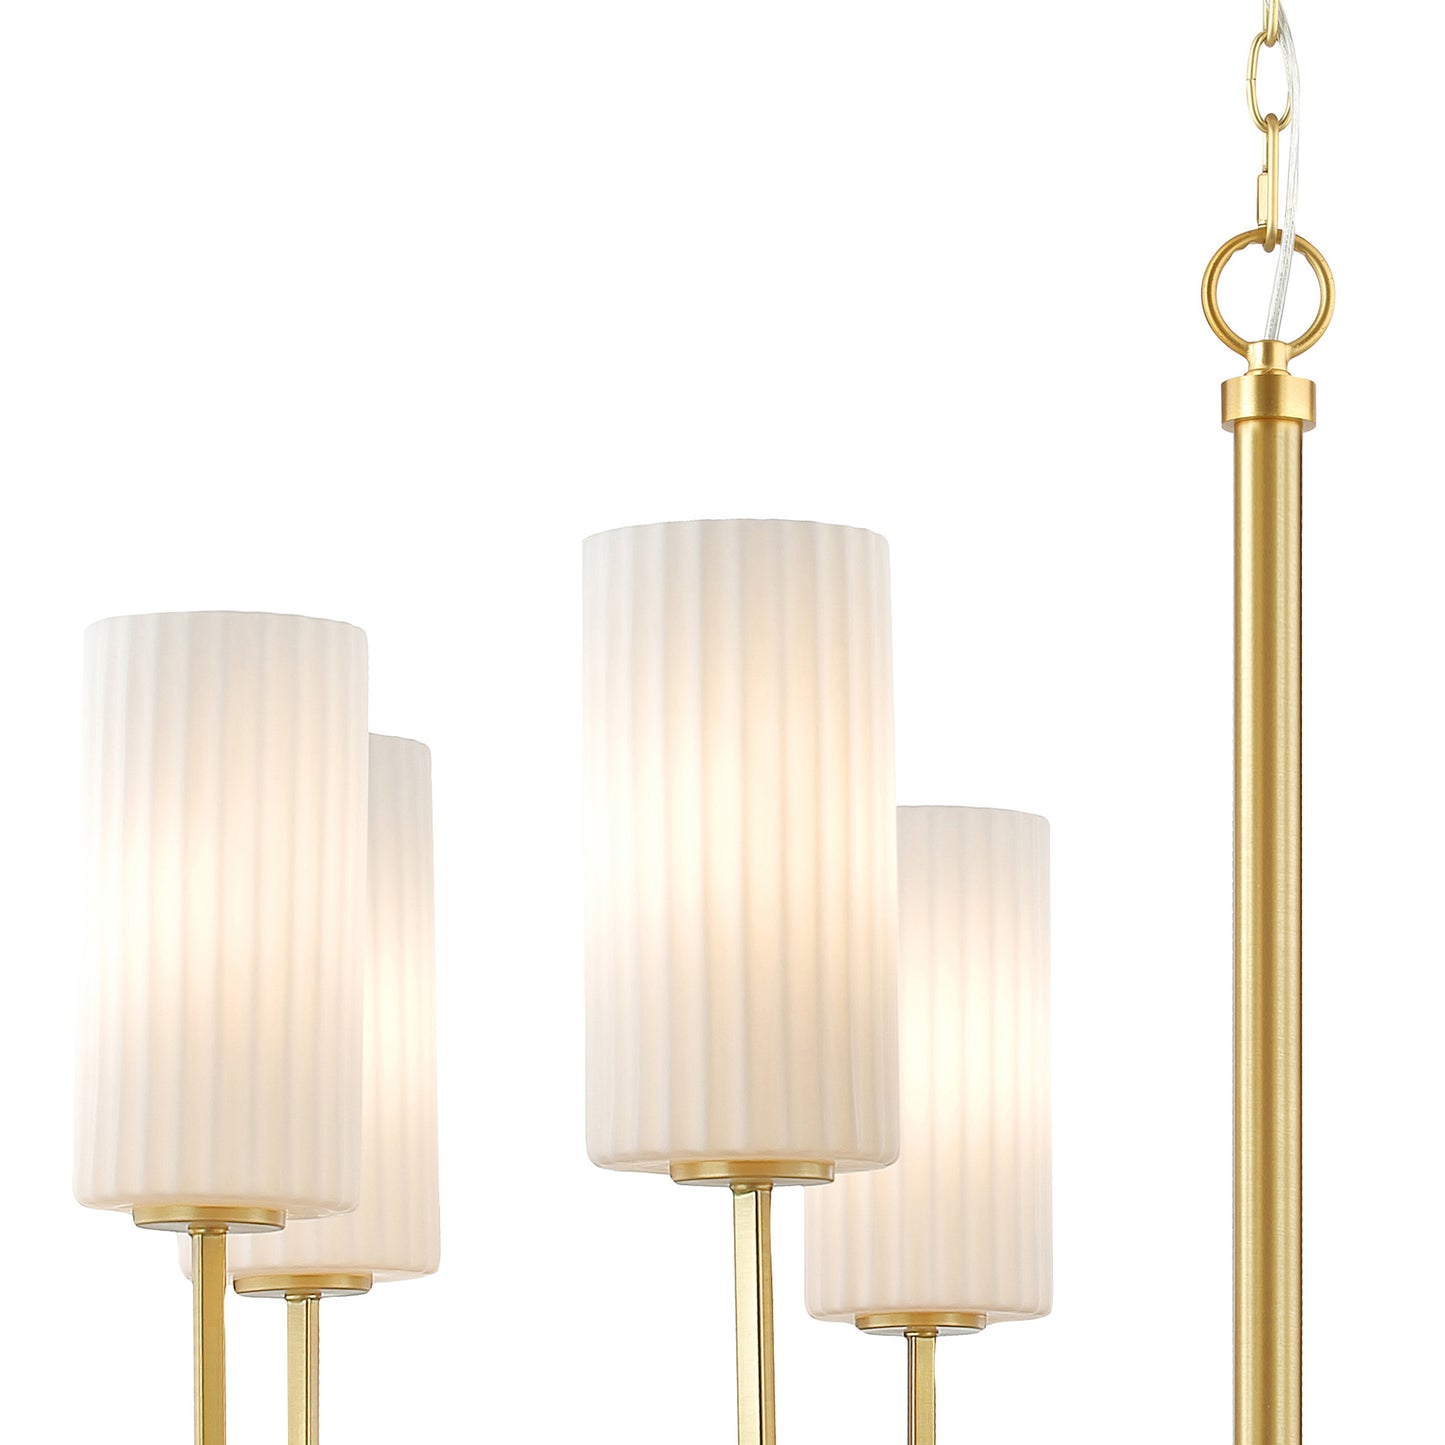 32008SWSBR - 8 Light Town and Country 34" Chandelier - Satin Brass